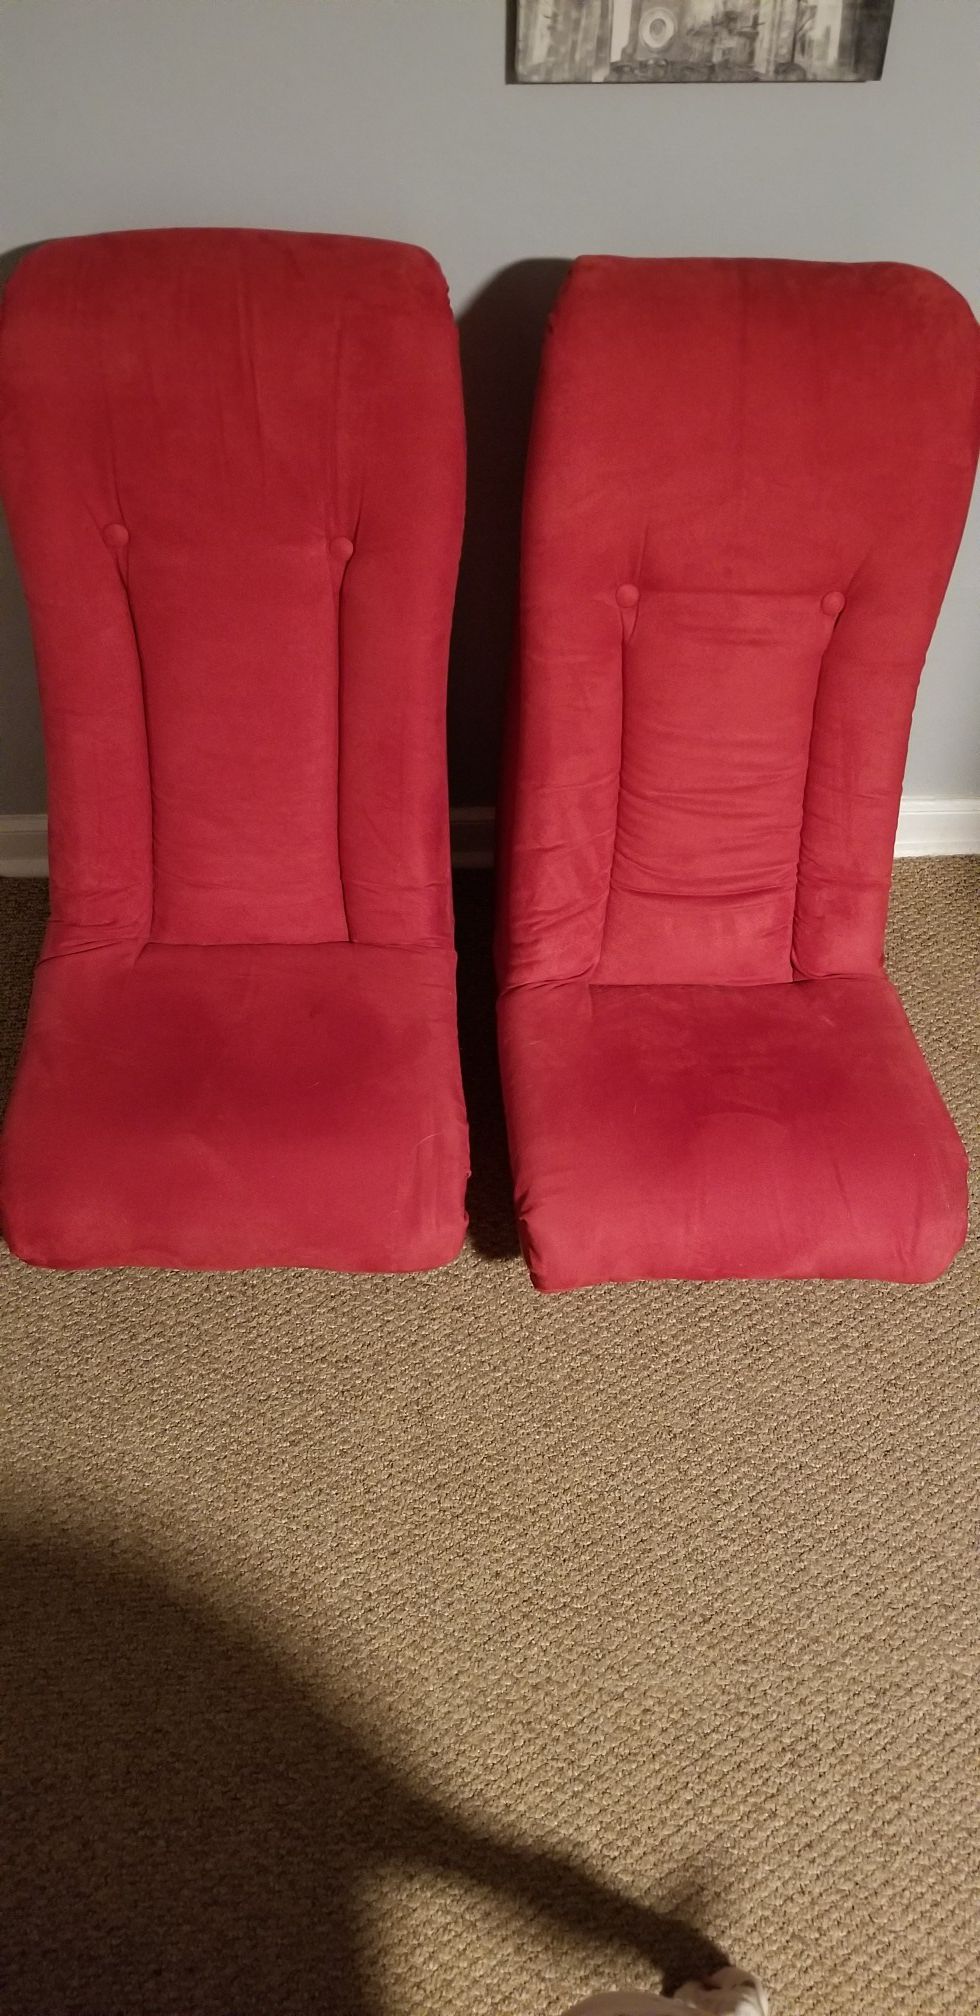 Two red rocker gaming chairs